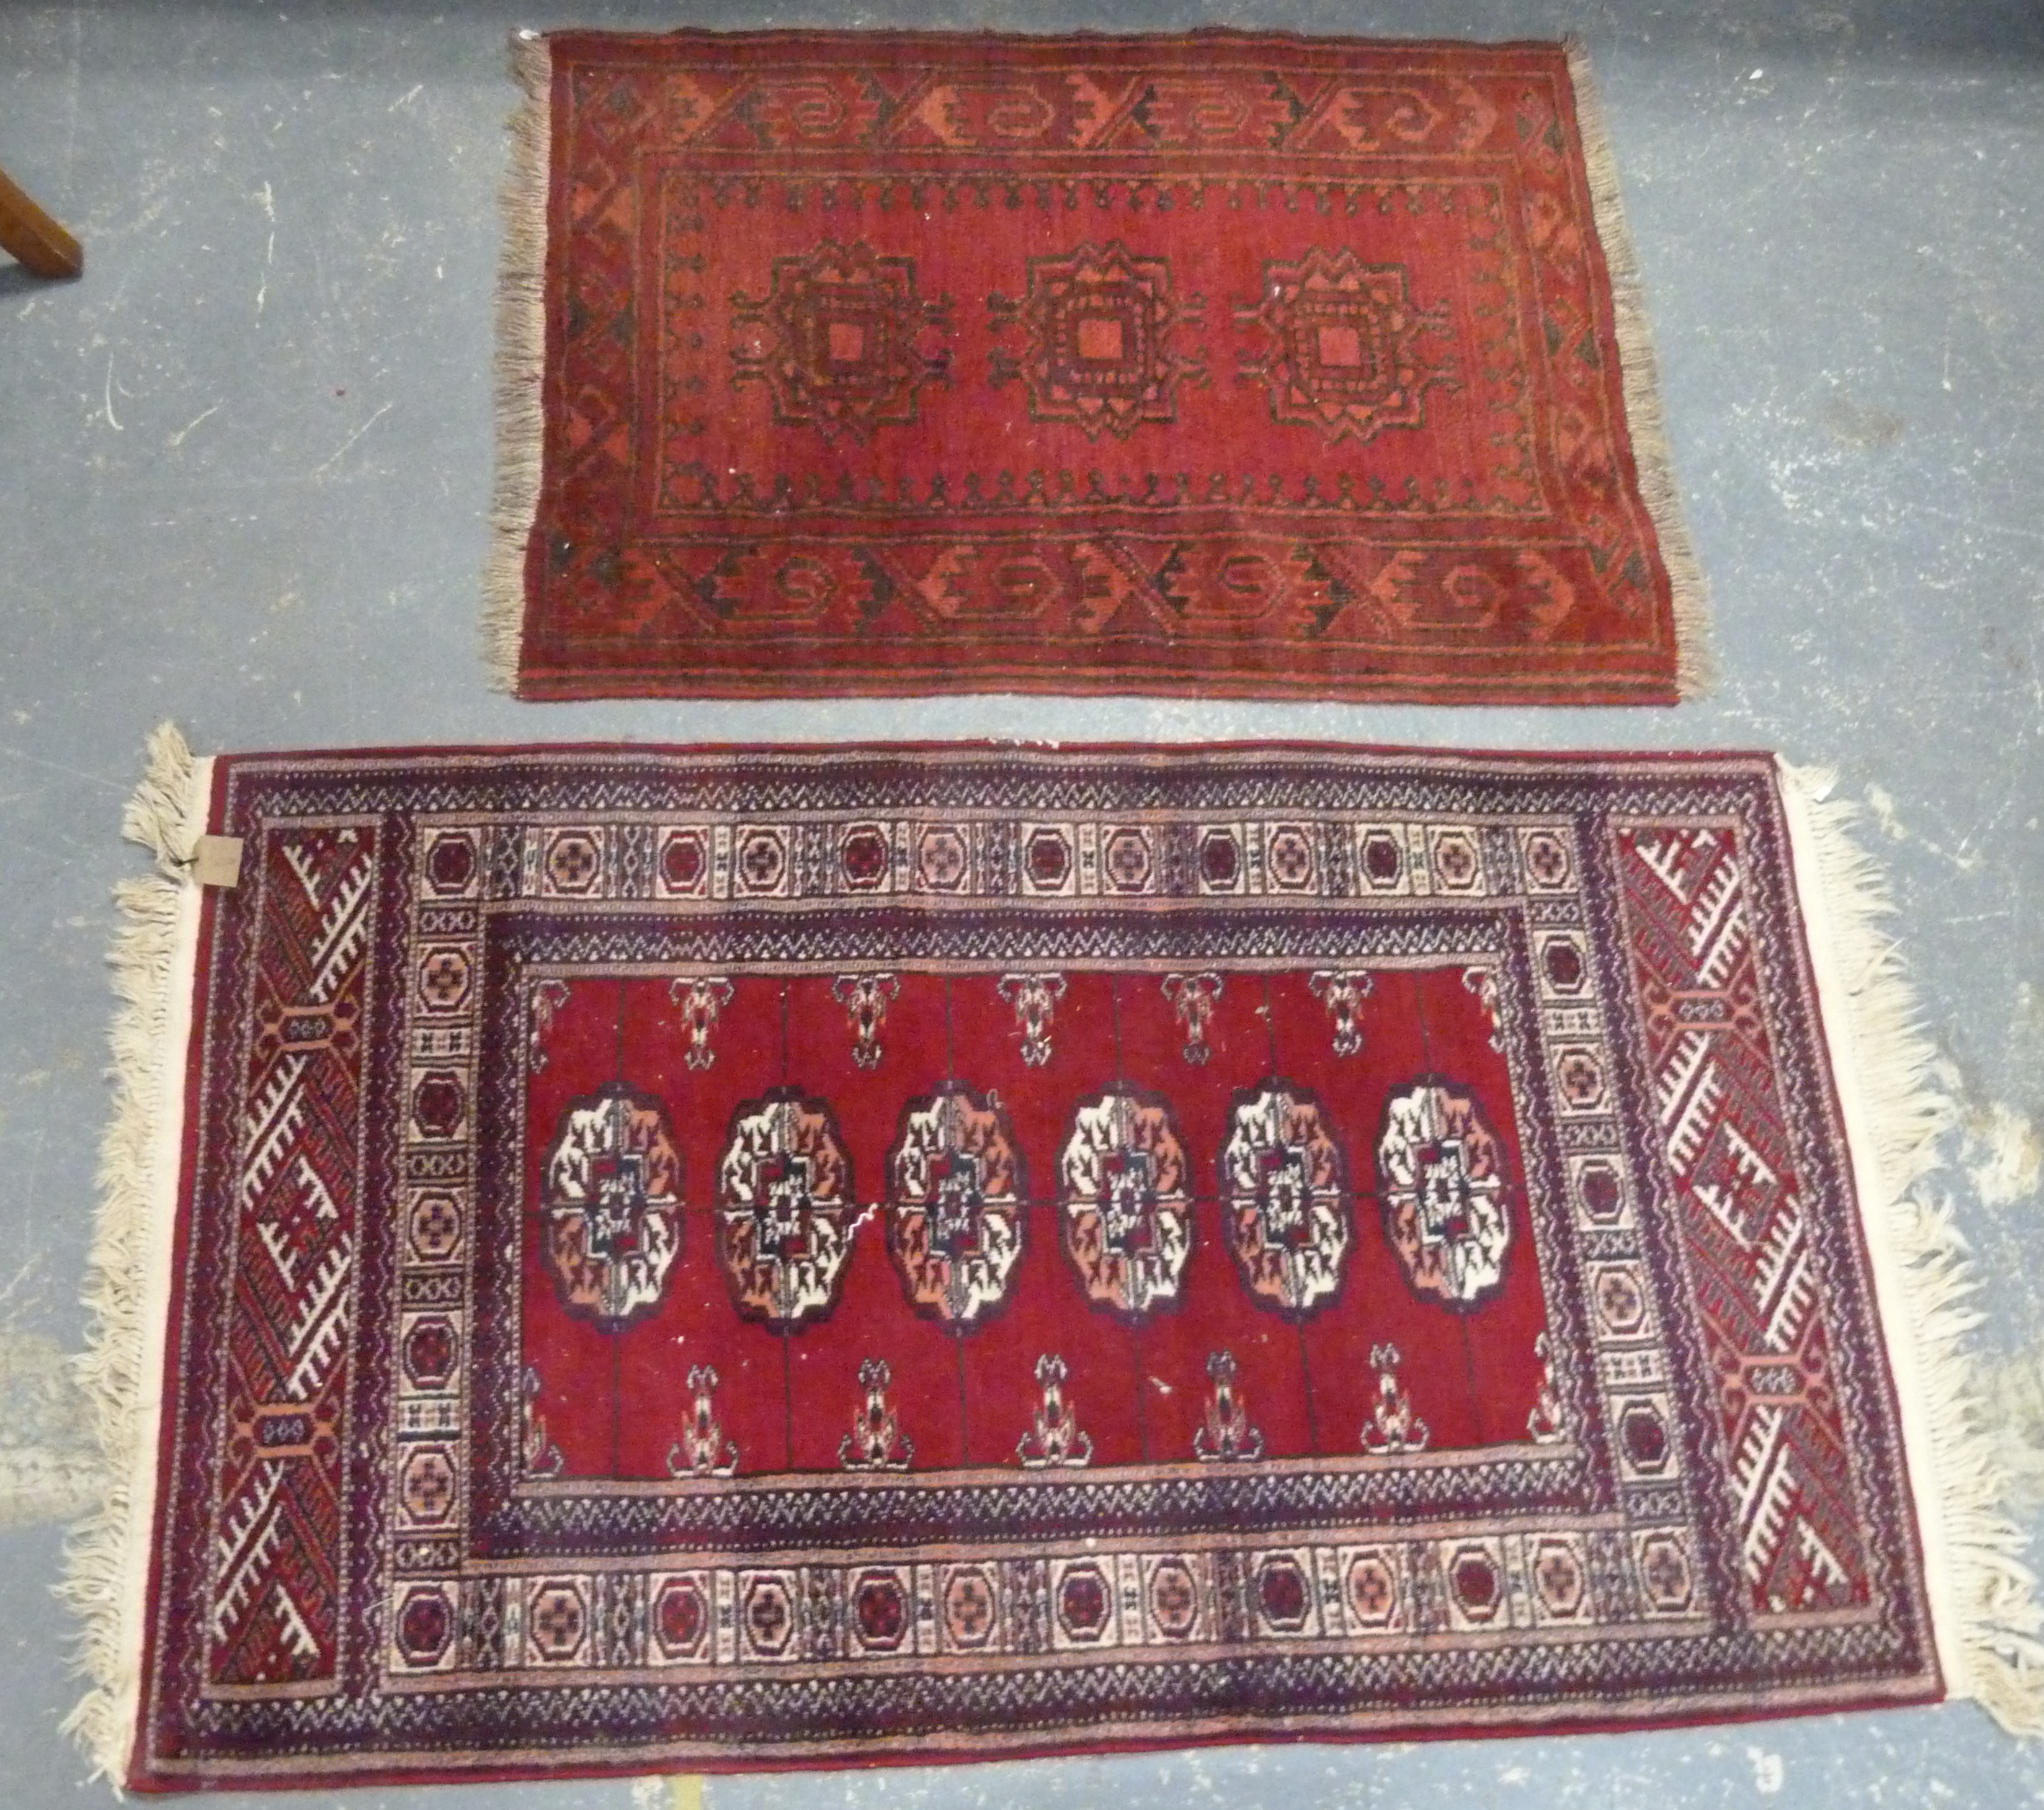 Two small Persian rugs, 130cm x 72cm and 95cm x 64cm.